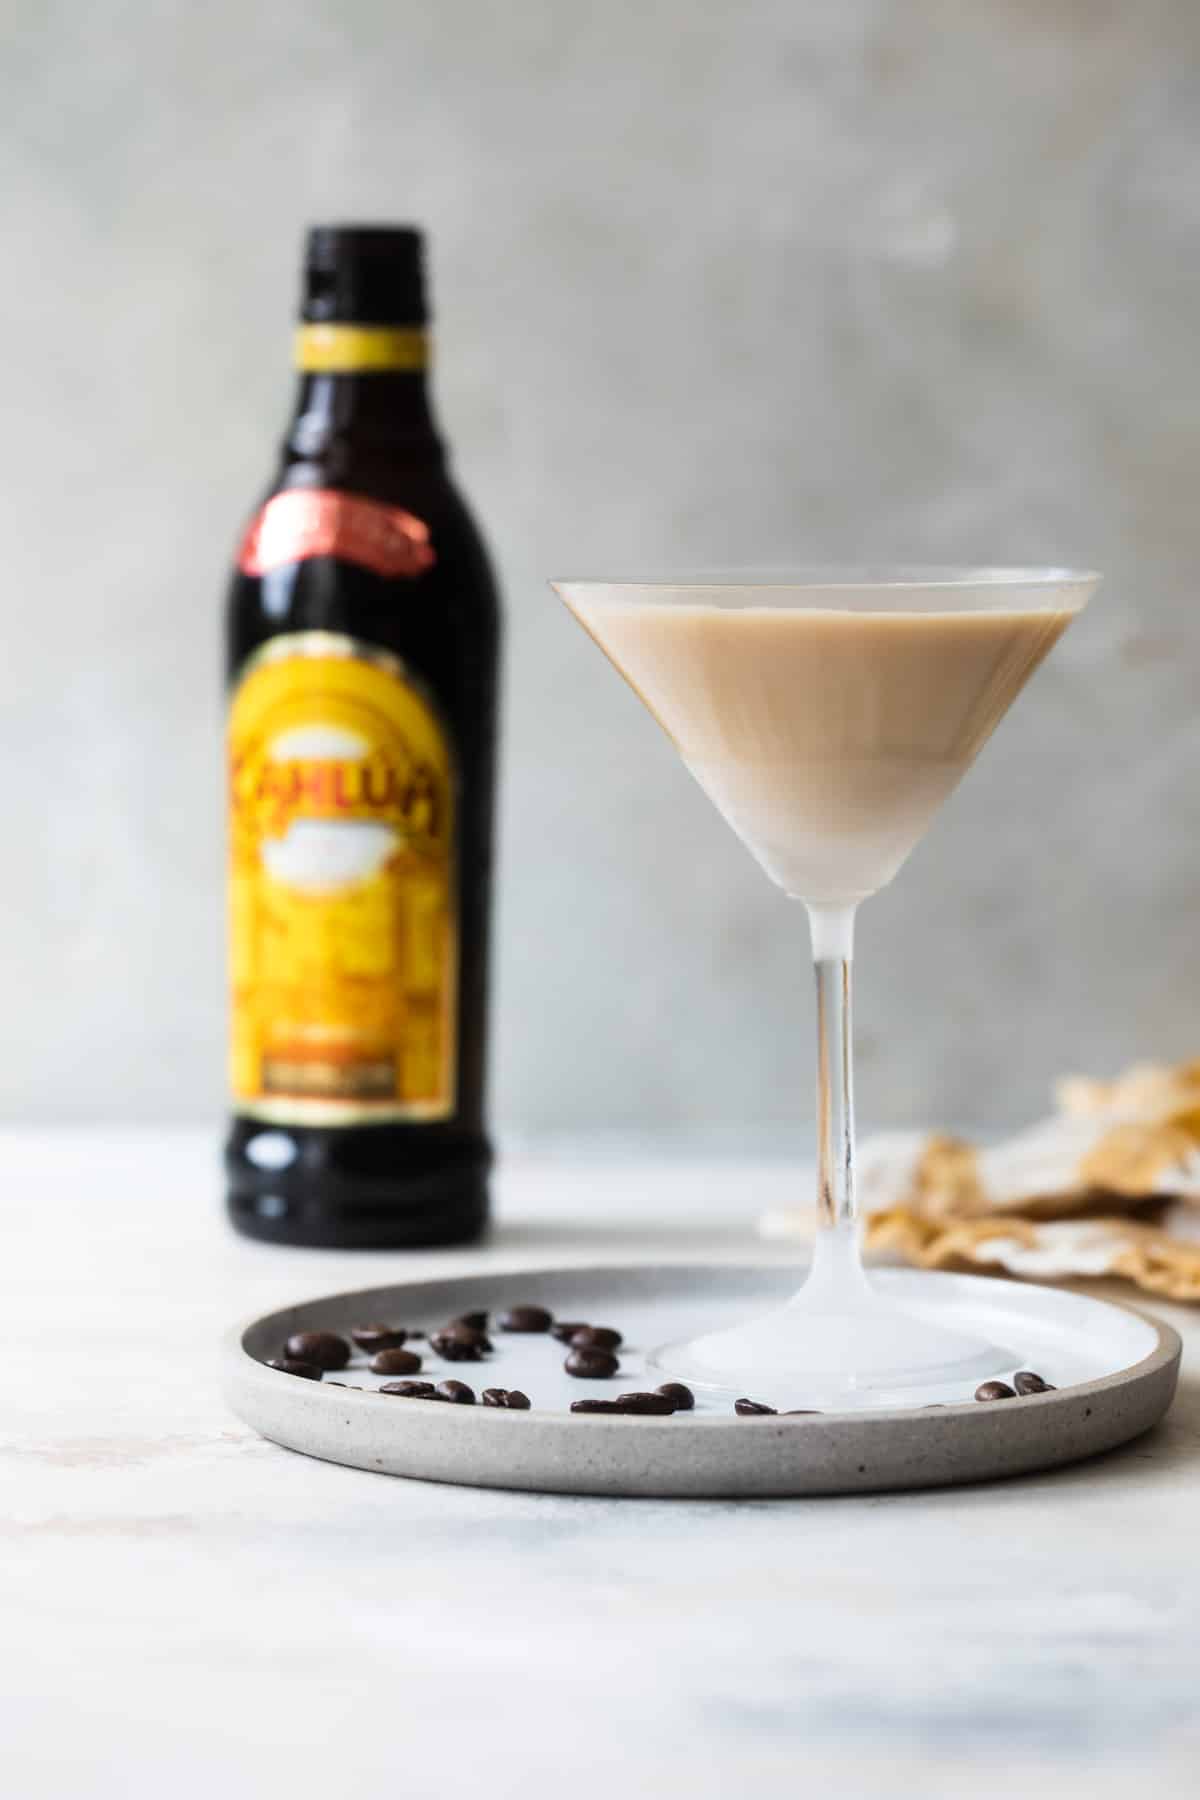 An espresso martini on a plate surrounded by espresso beans.